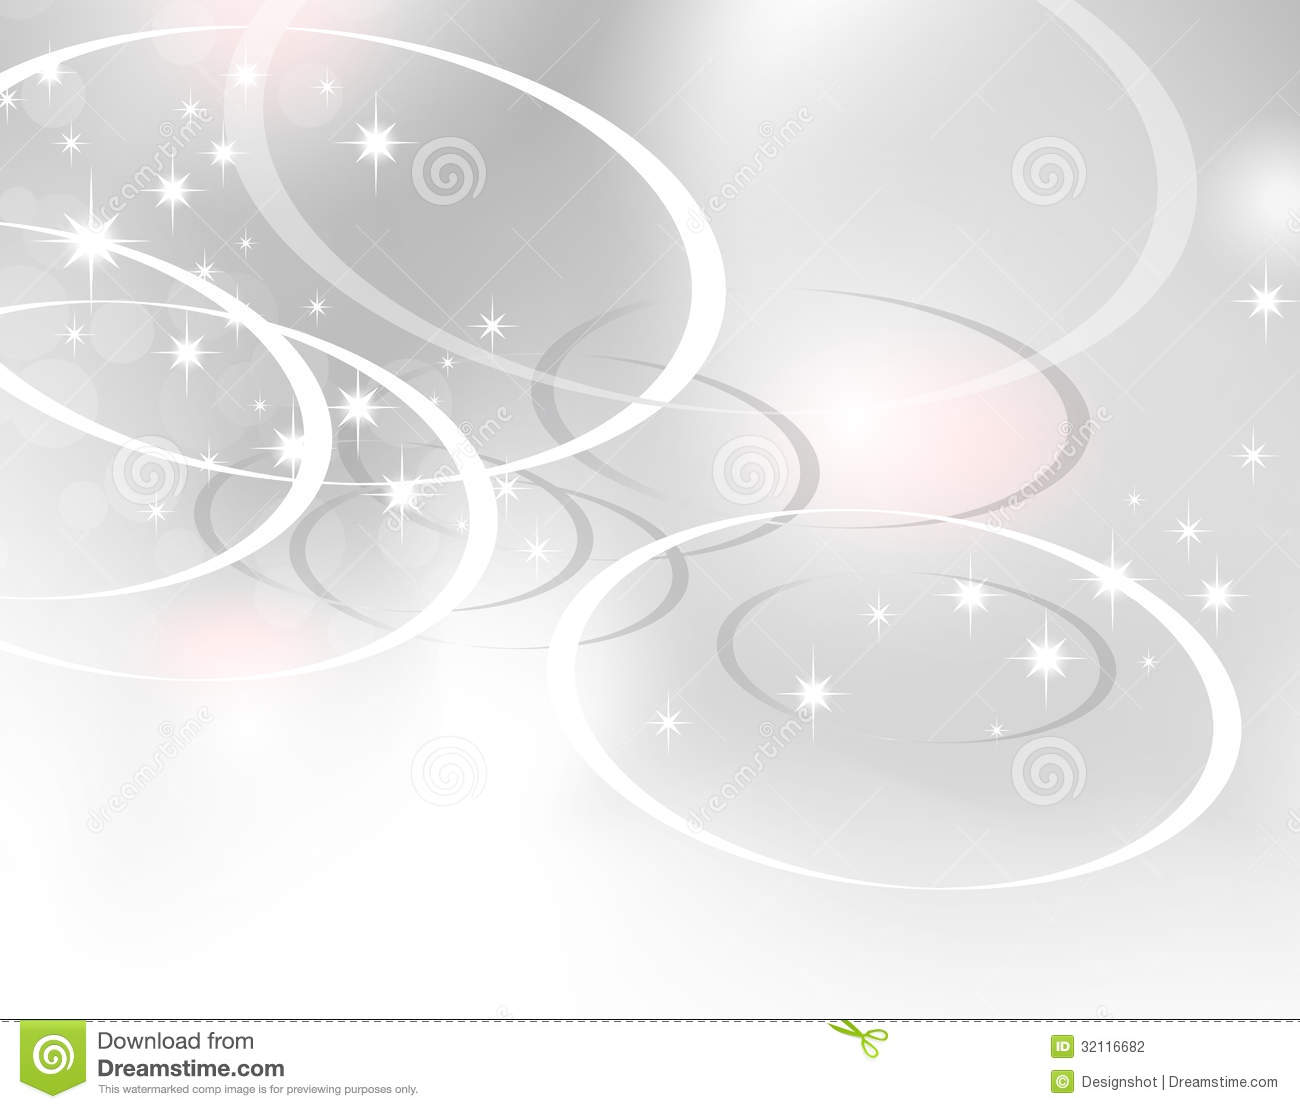 Light Abstract Circle Background With Silver Grey To White Gradient